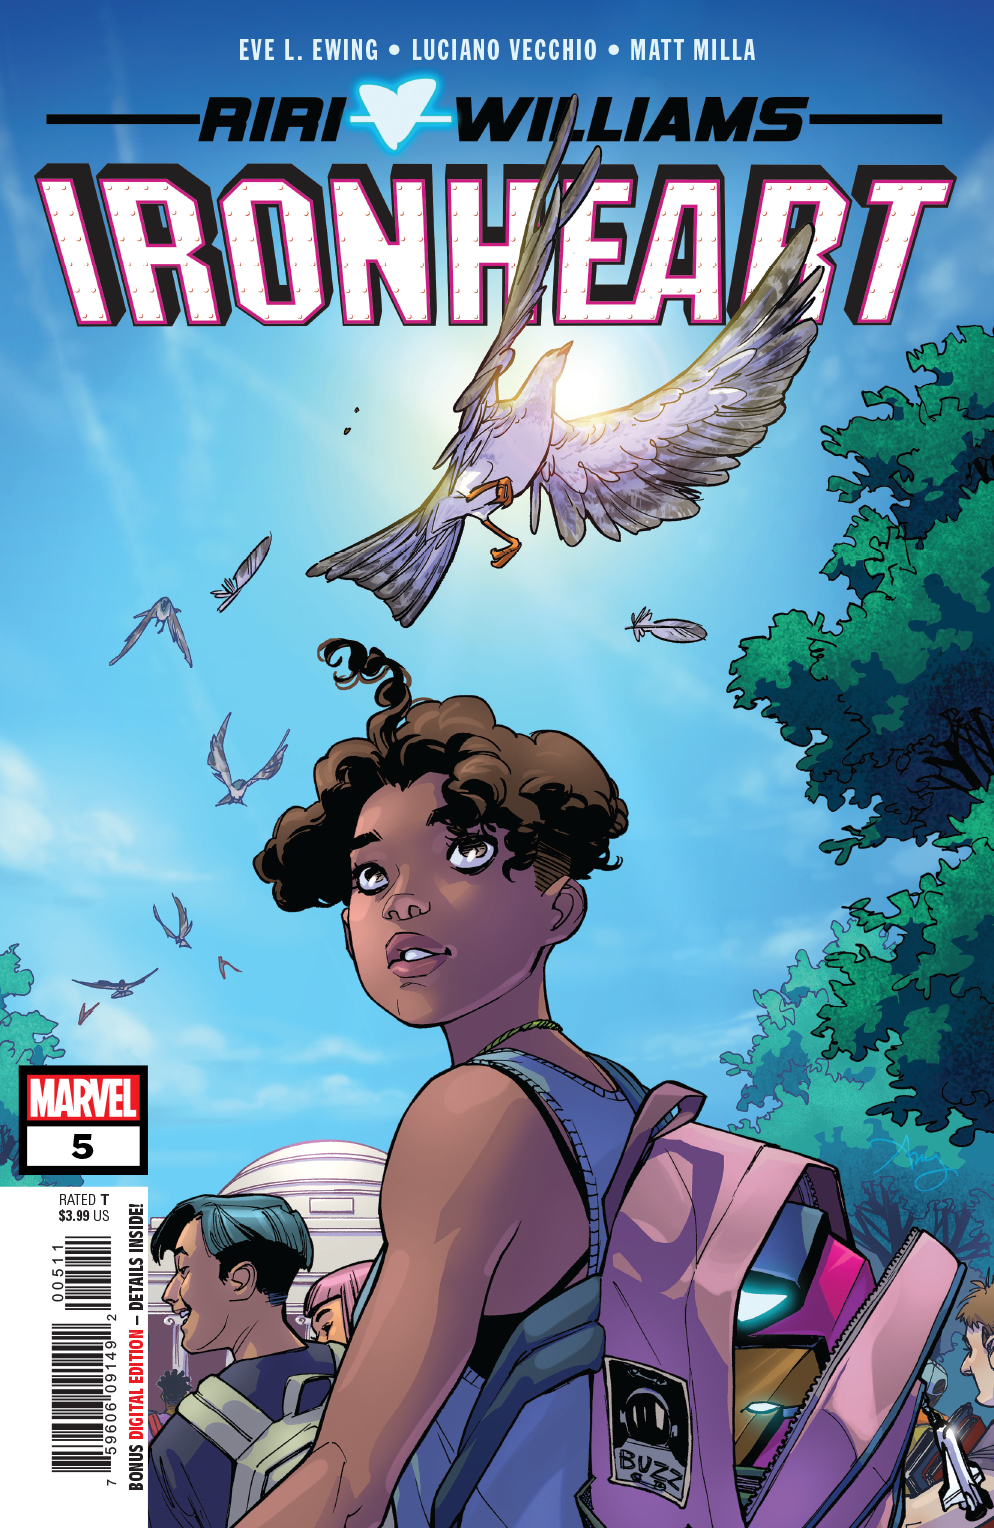 Ironheart #5. Cover by Amy Reeder.